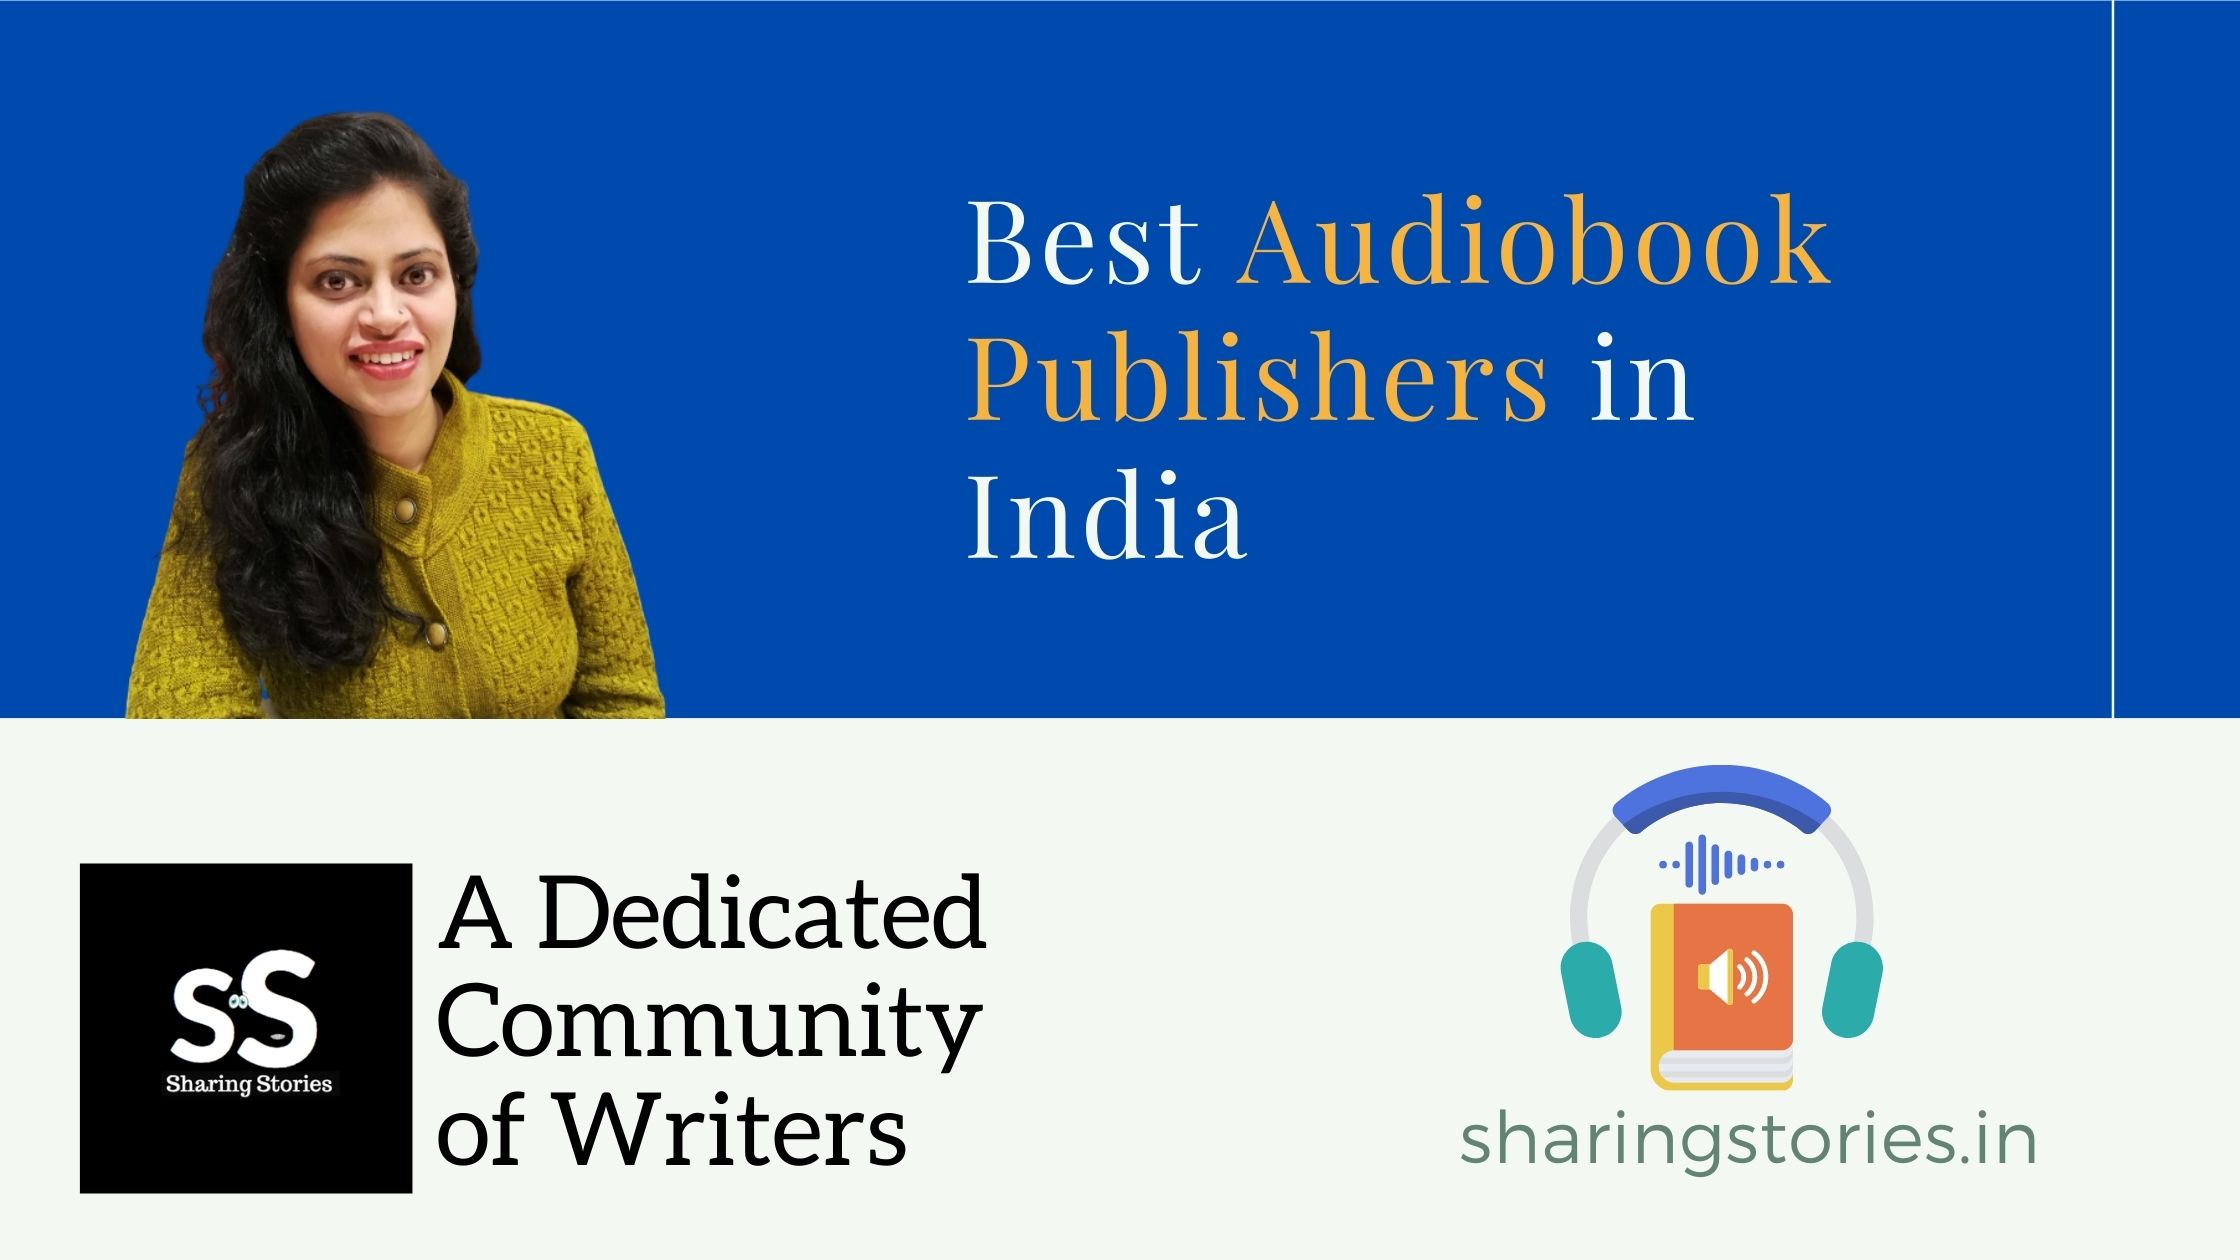 Audiobook Publishing Companies in India